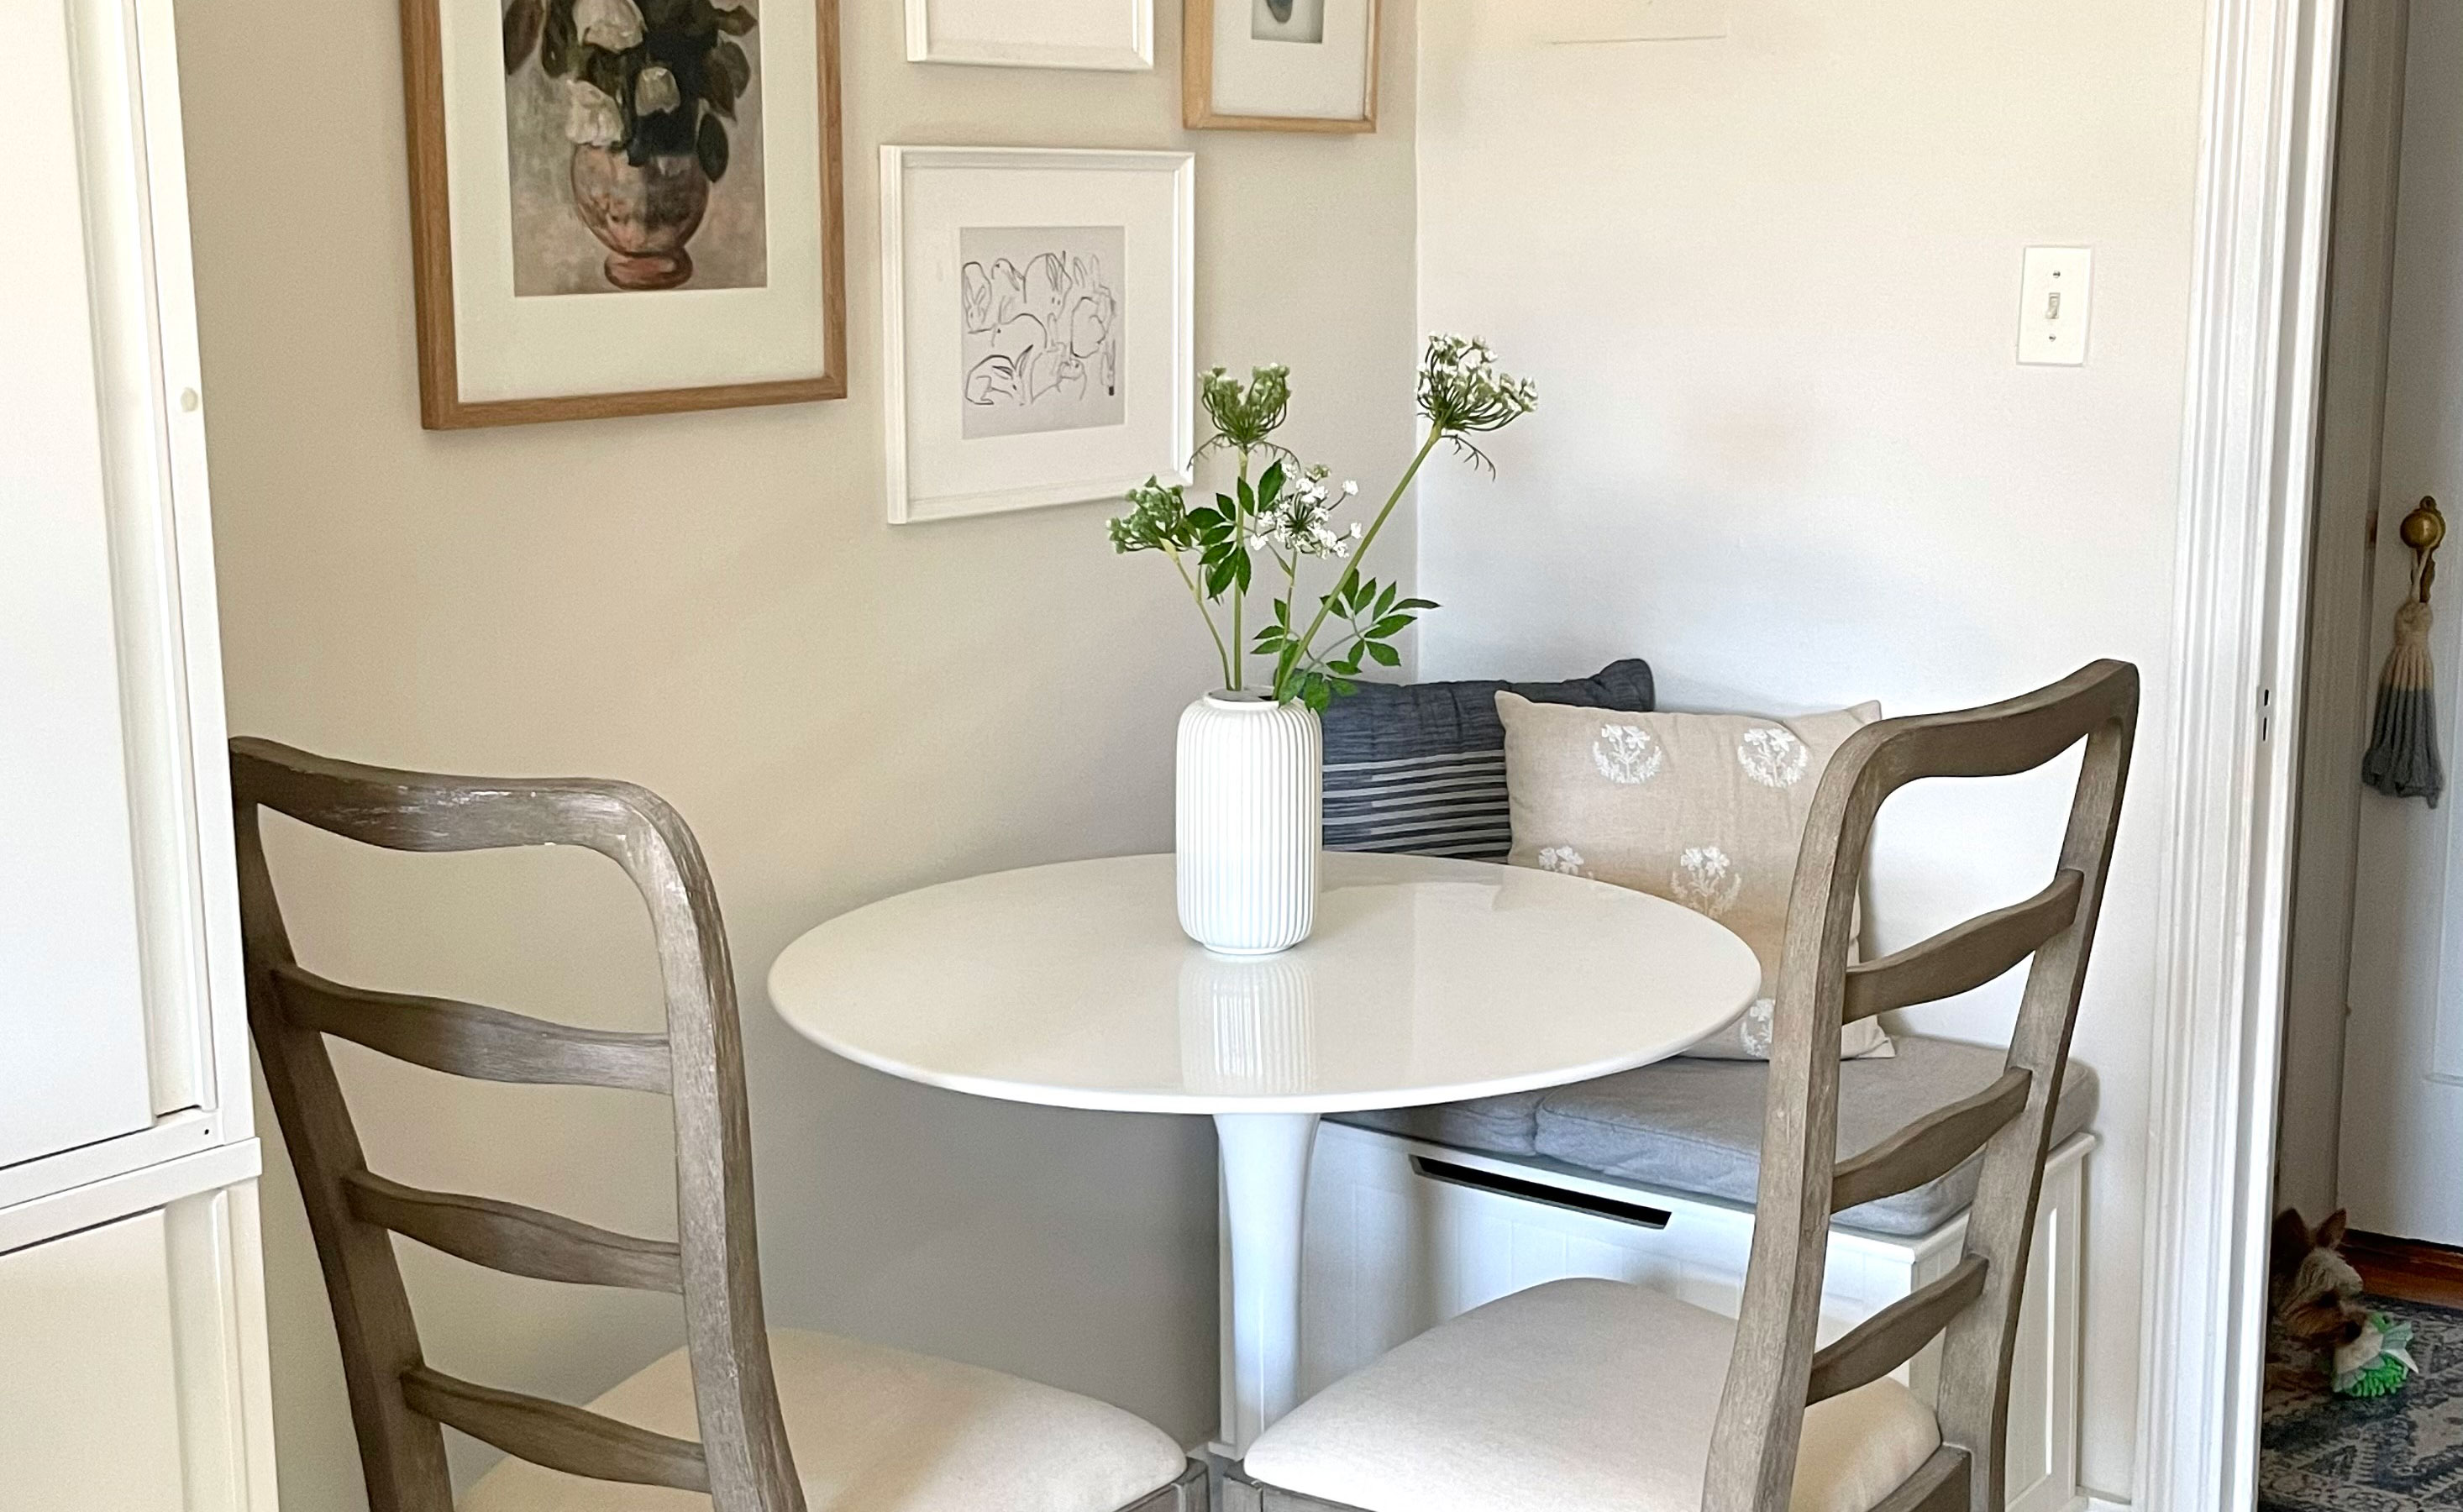 Best Breakfast Nook Ideas for a Small Kitchen - How to Decorate